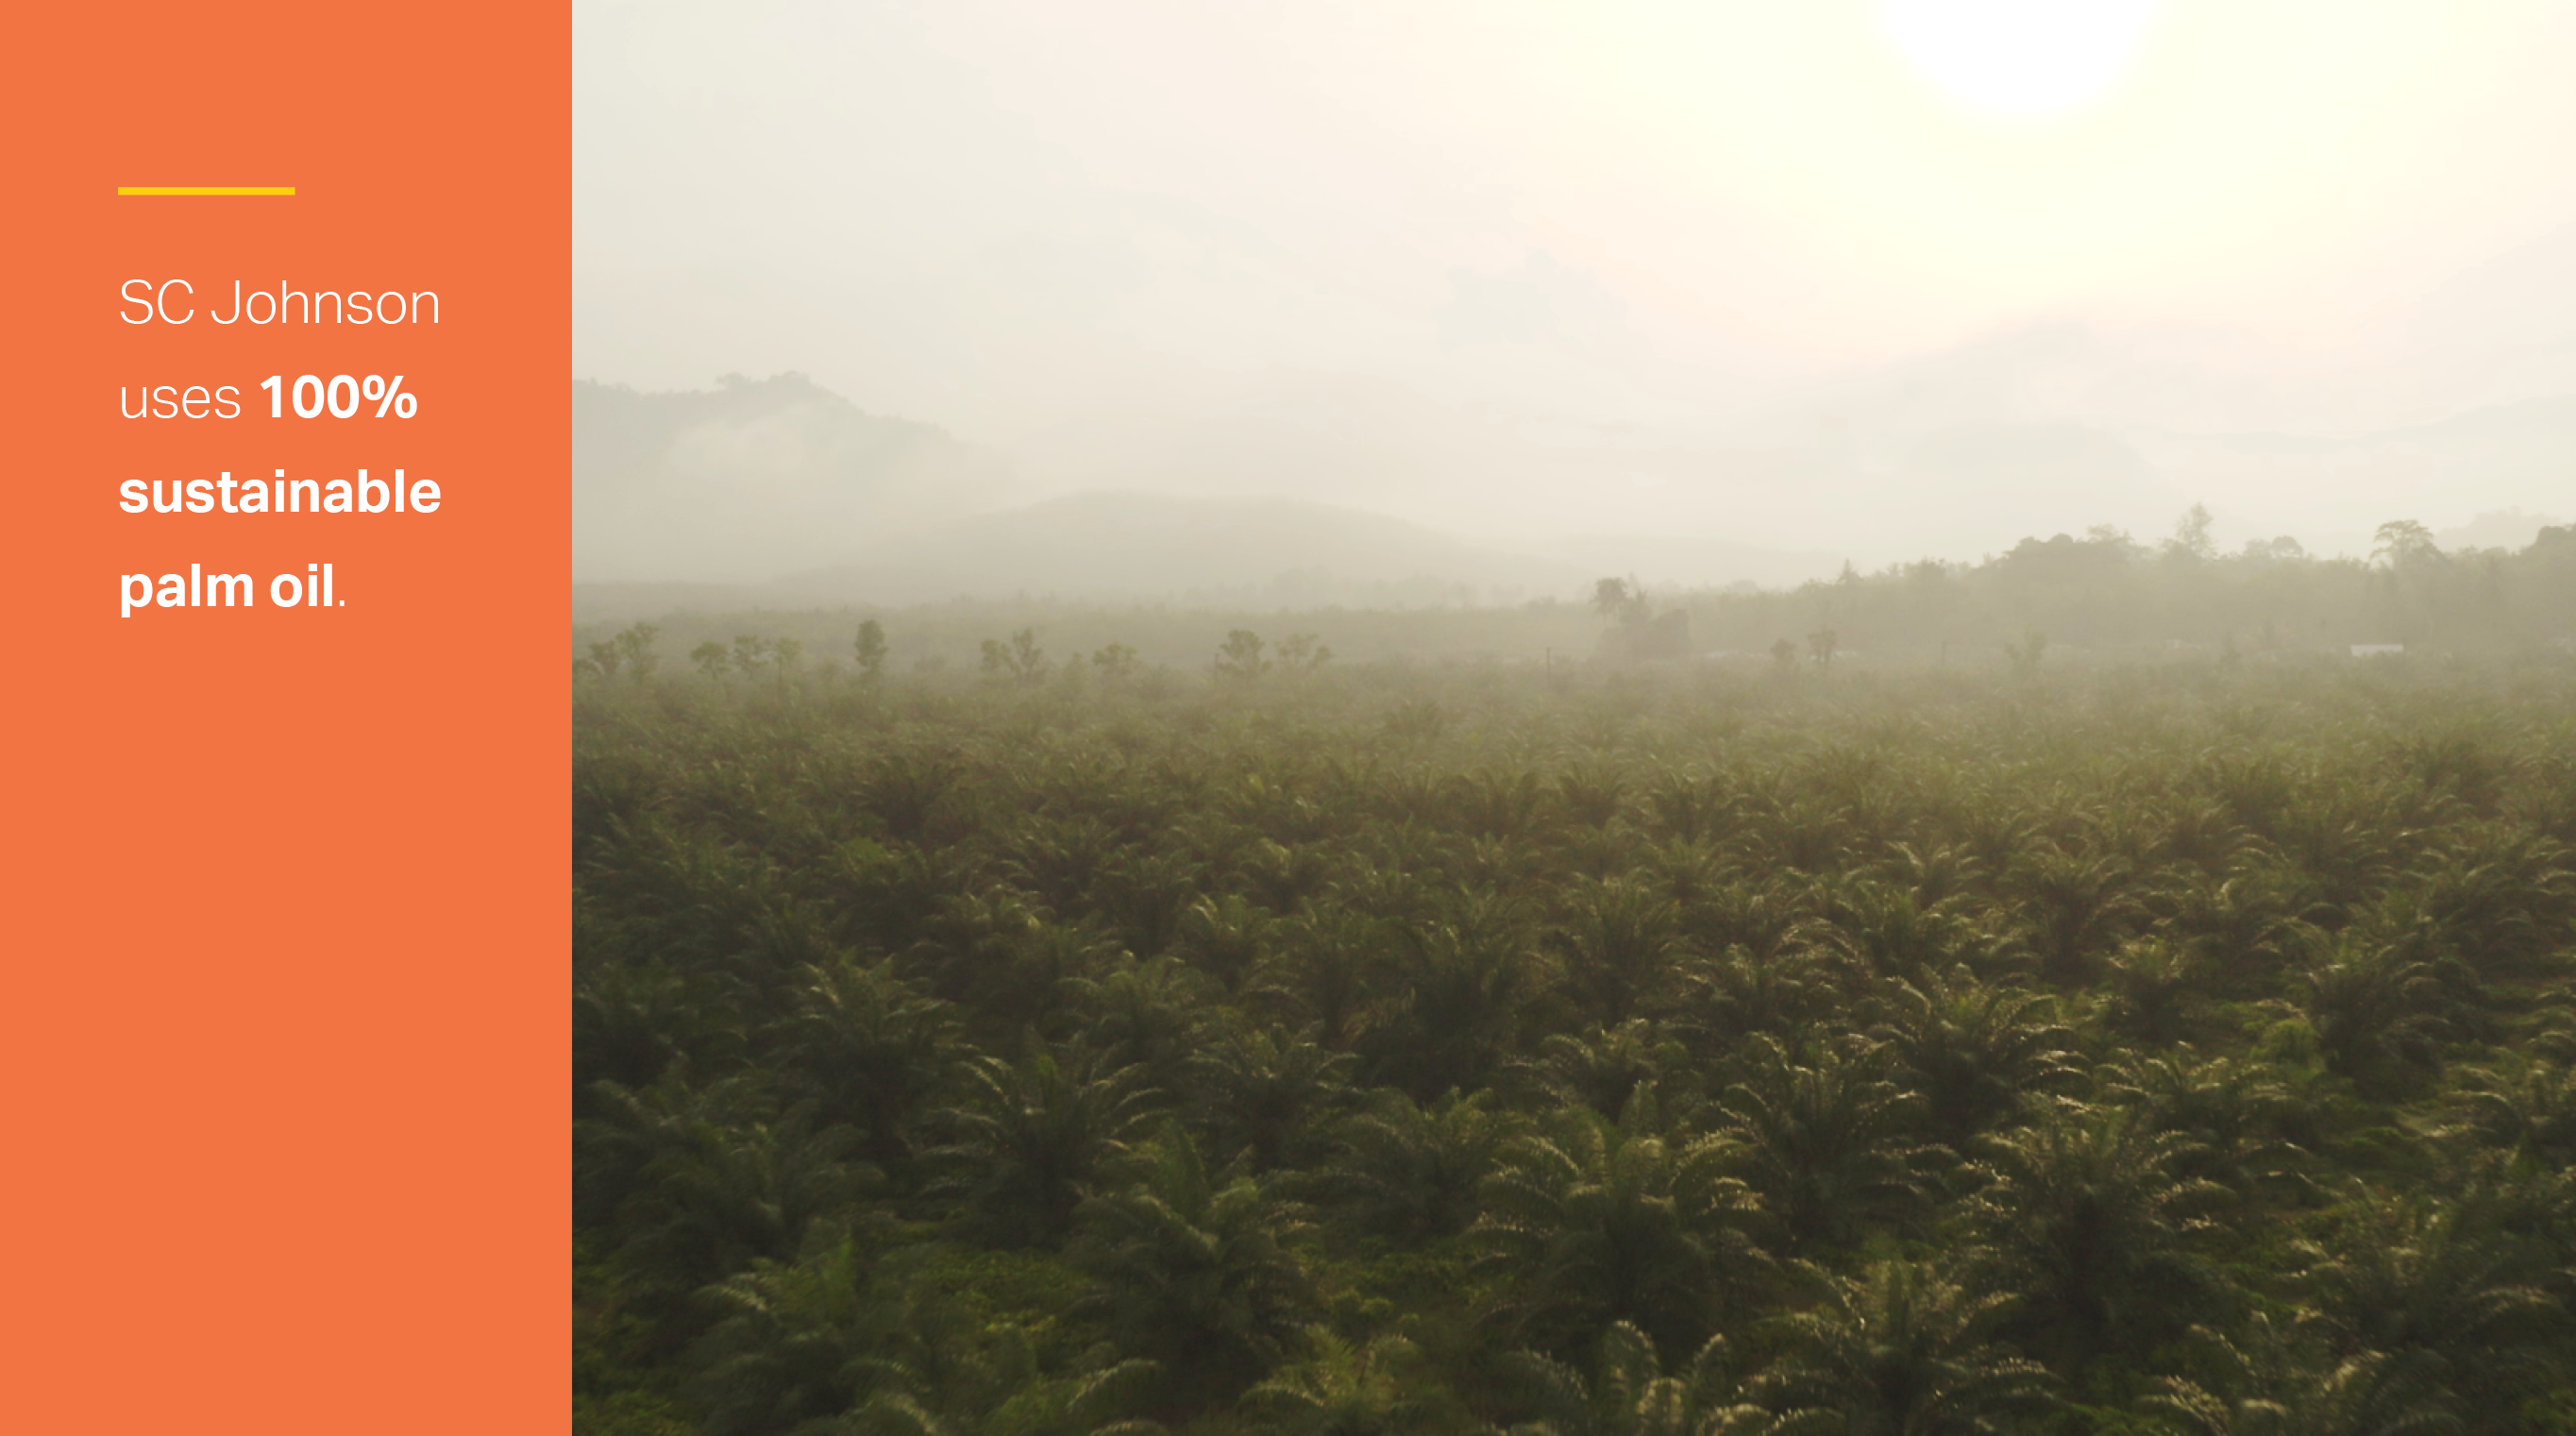 infographic tile: palm oil field. Text reads: SC Johnson uses 100% sustainable palm oil.